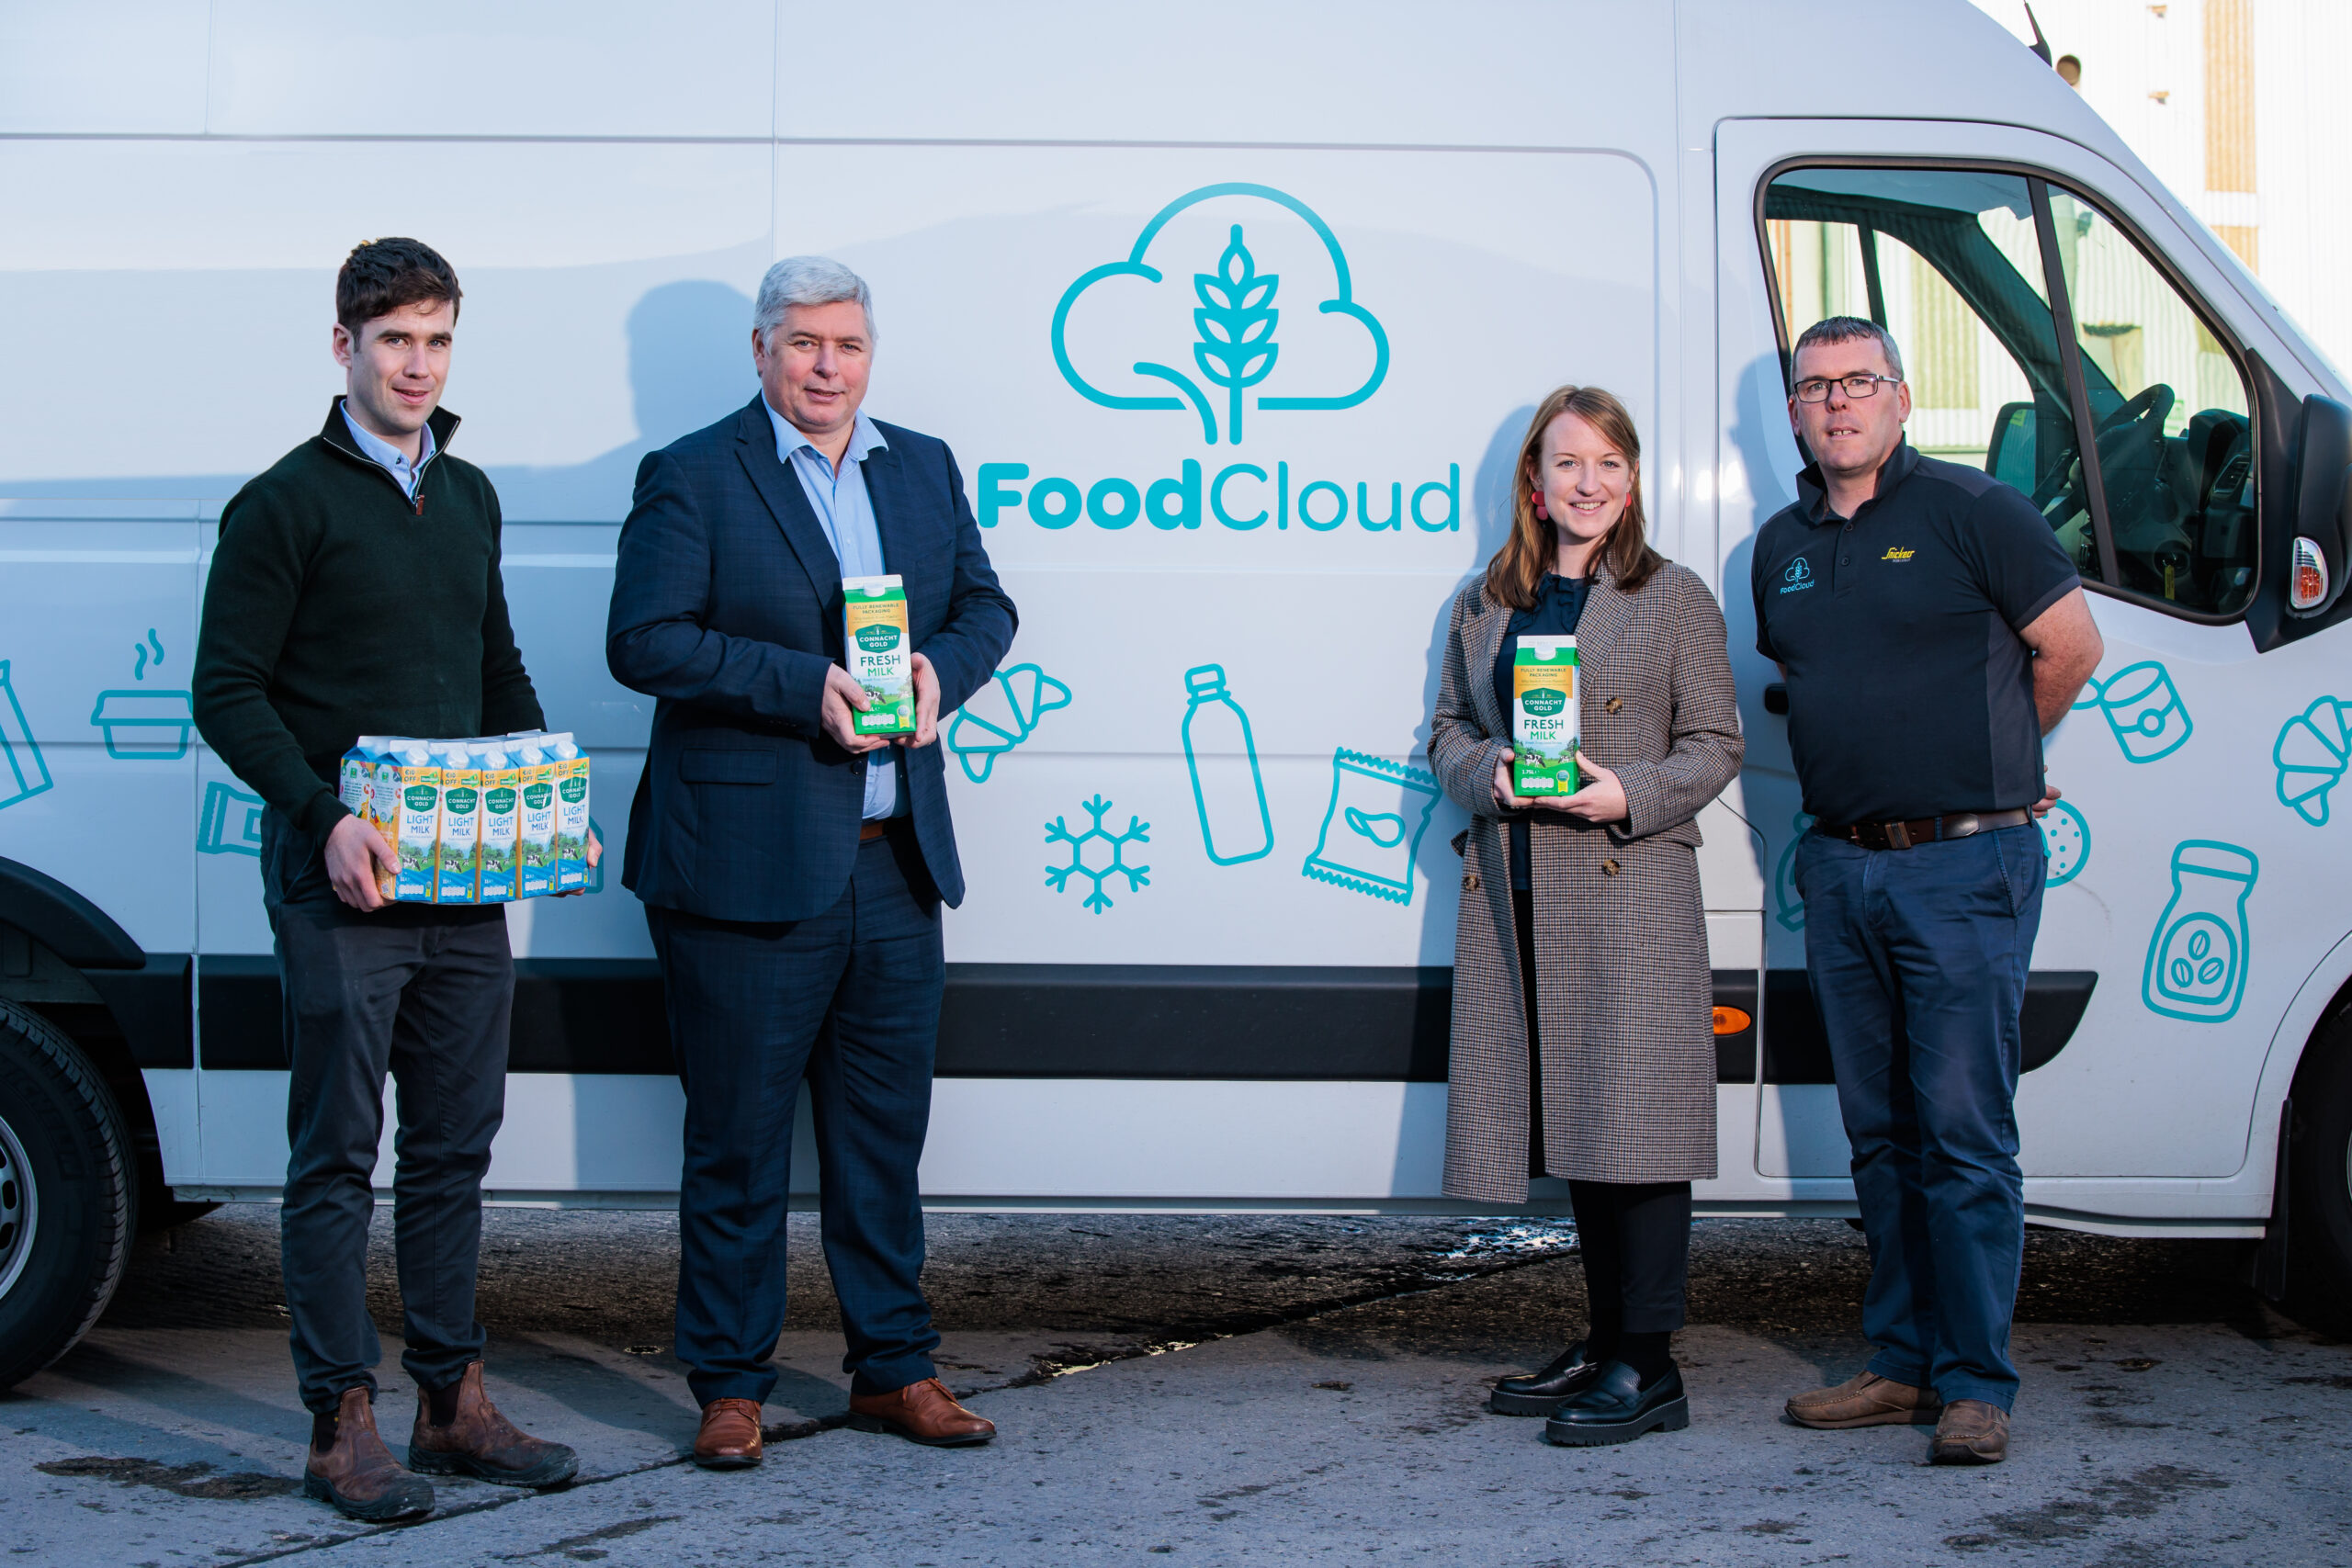 Aurivo partner with FoodCloud to help combat food waste